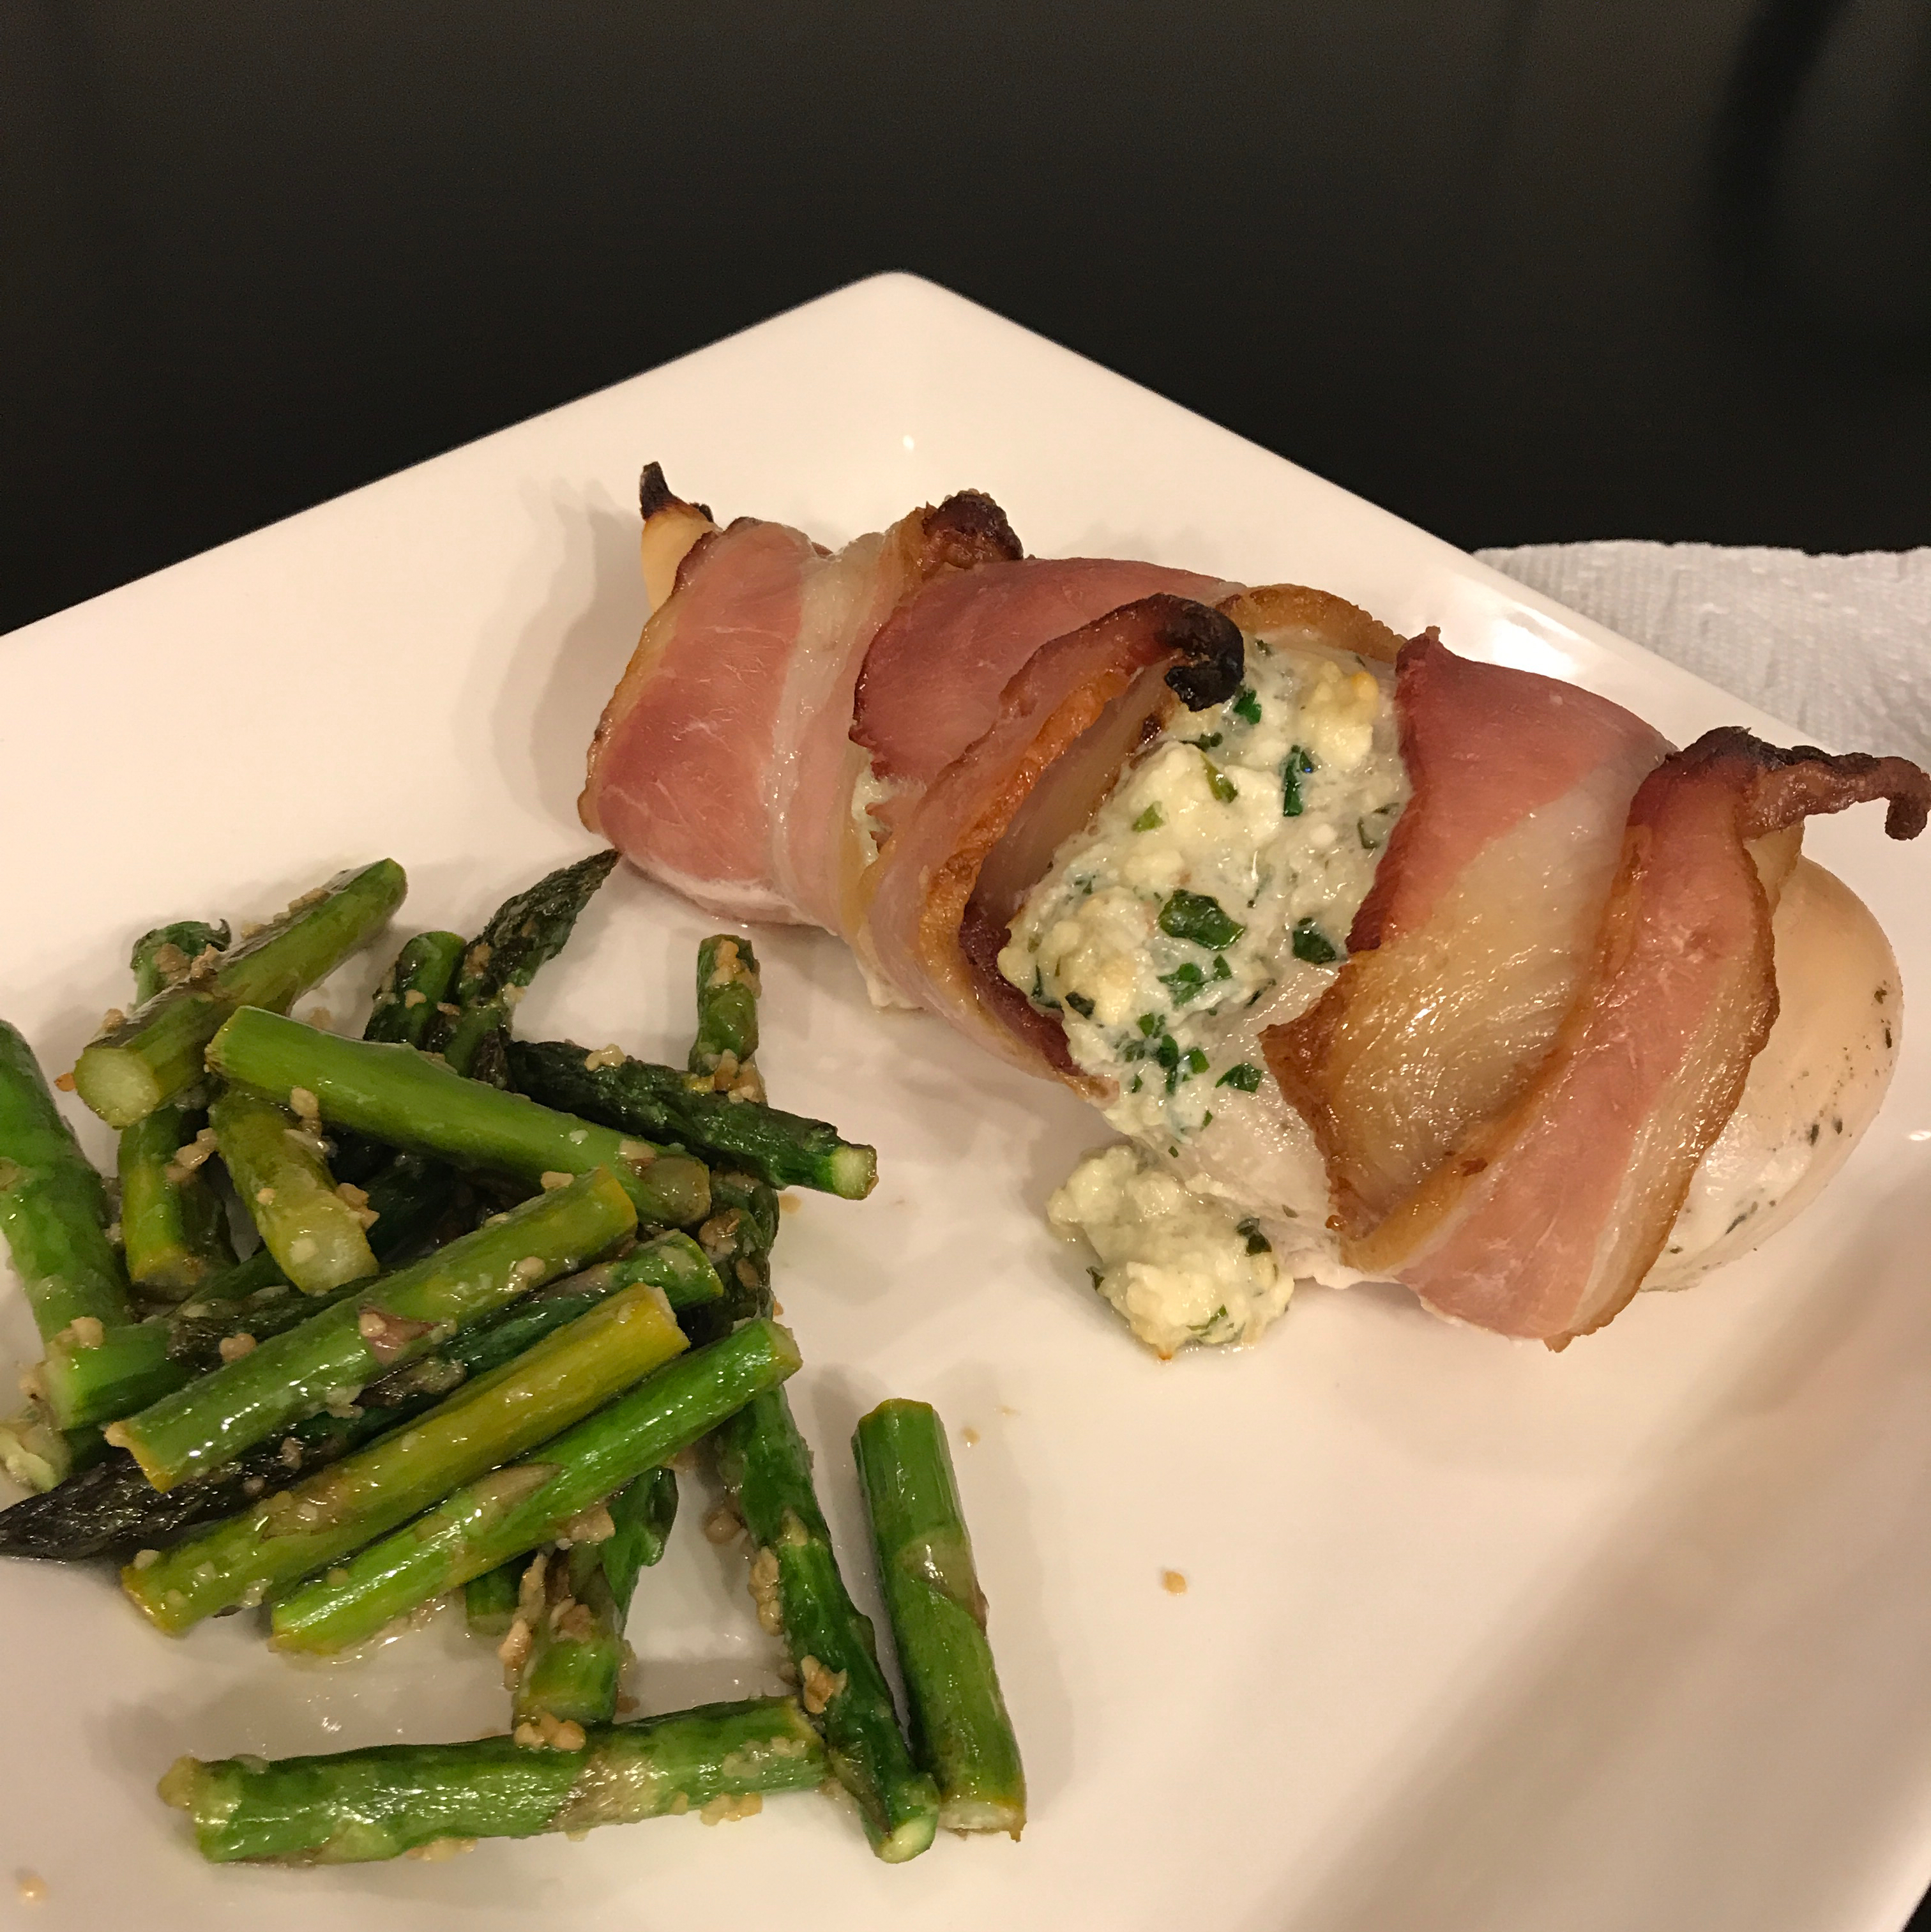 Gorgonzola Stuffed Chicken Breasts Wrapped in Bacon 